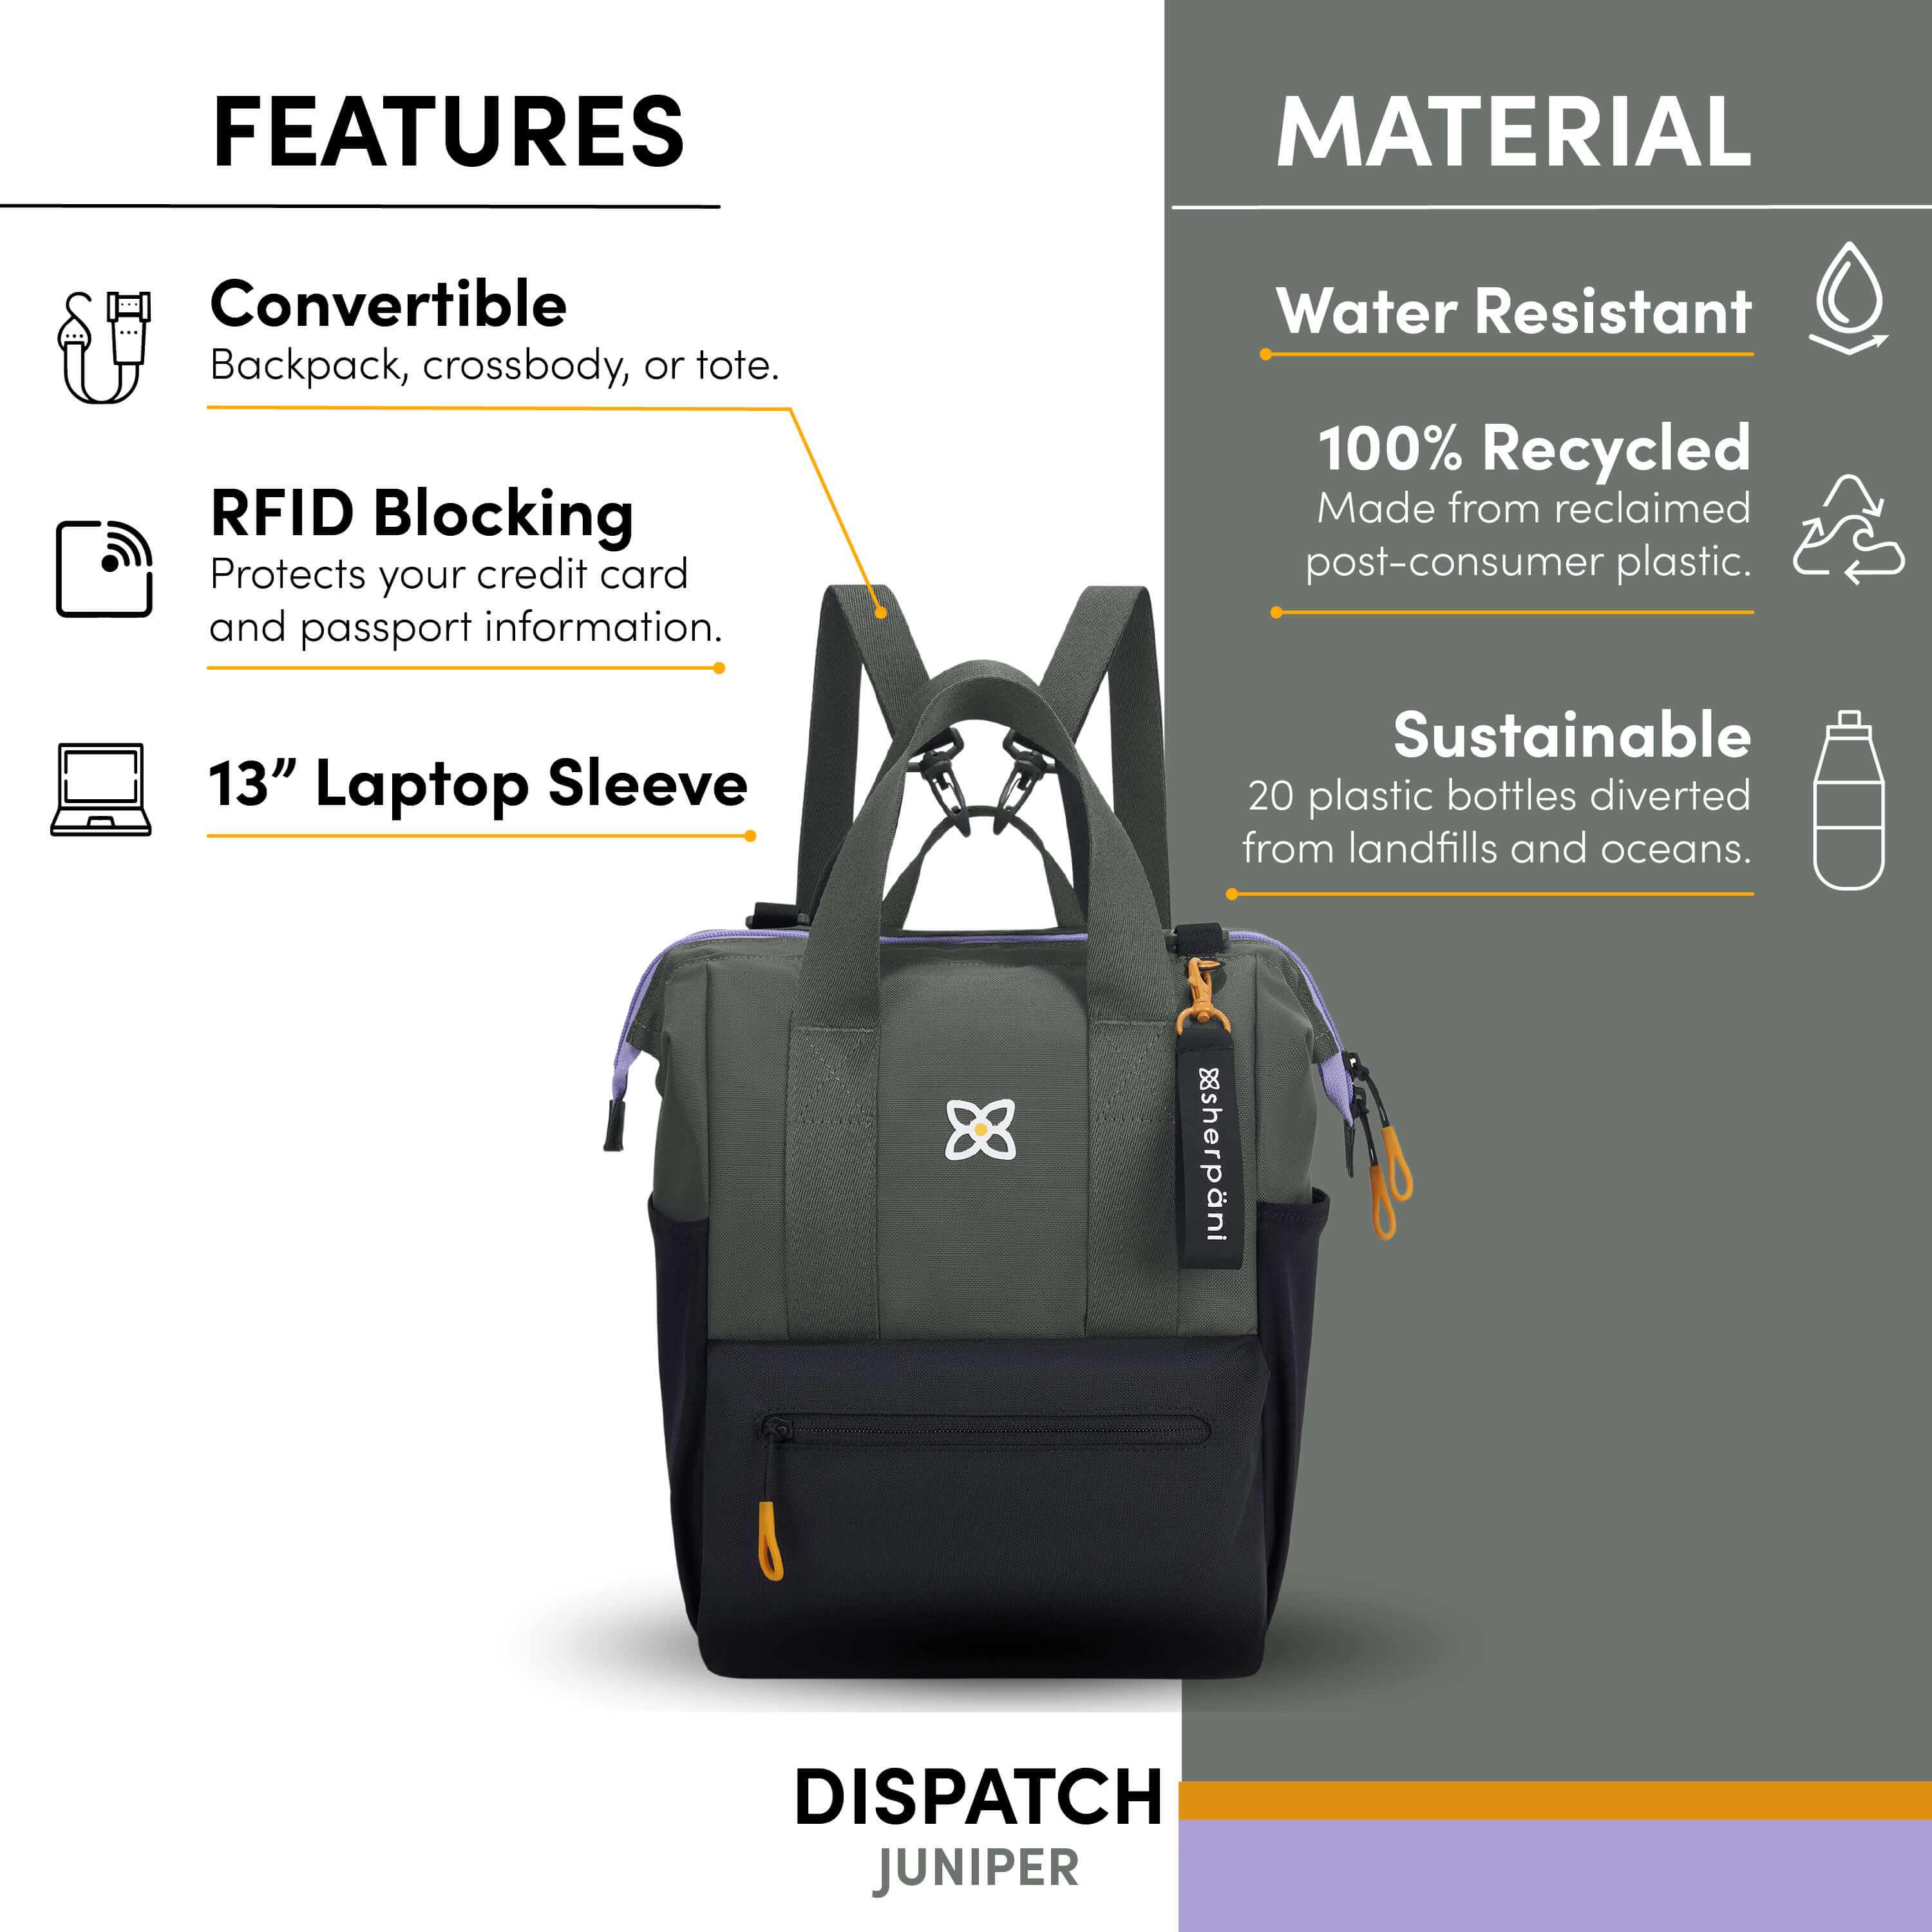 Graphic depicting the following special features of Sherpani travel purse for women, the Dispatch: 3-in-1 versatility (backpack, crossbody, tote), RFID protection, 13" laptop sleeve, water-resistant material, sustainably made from repurposed plastic bottles. 